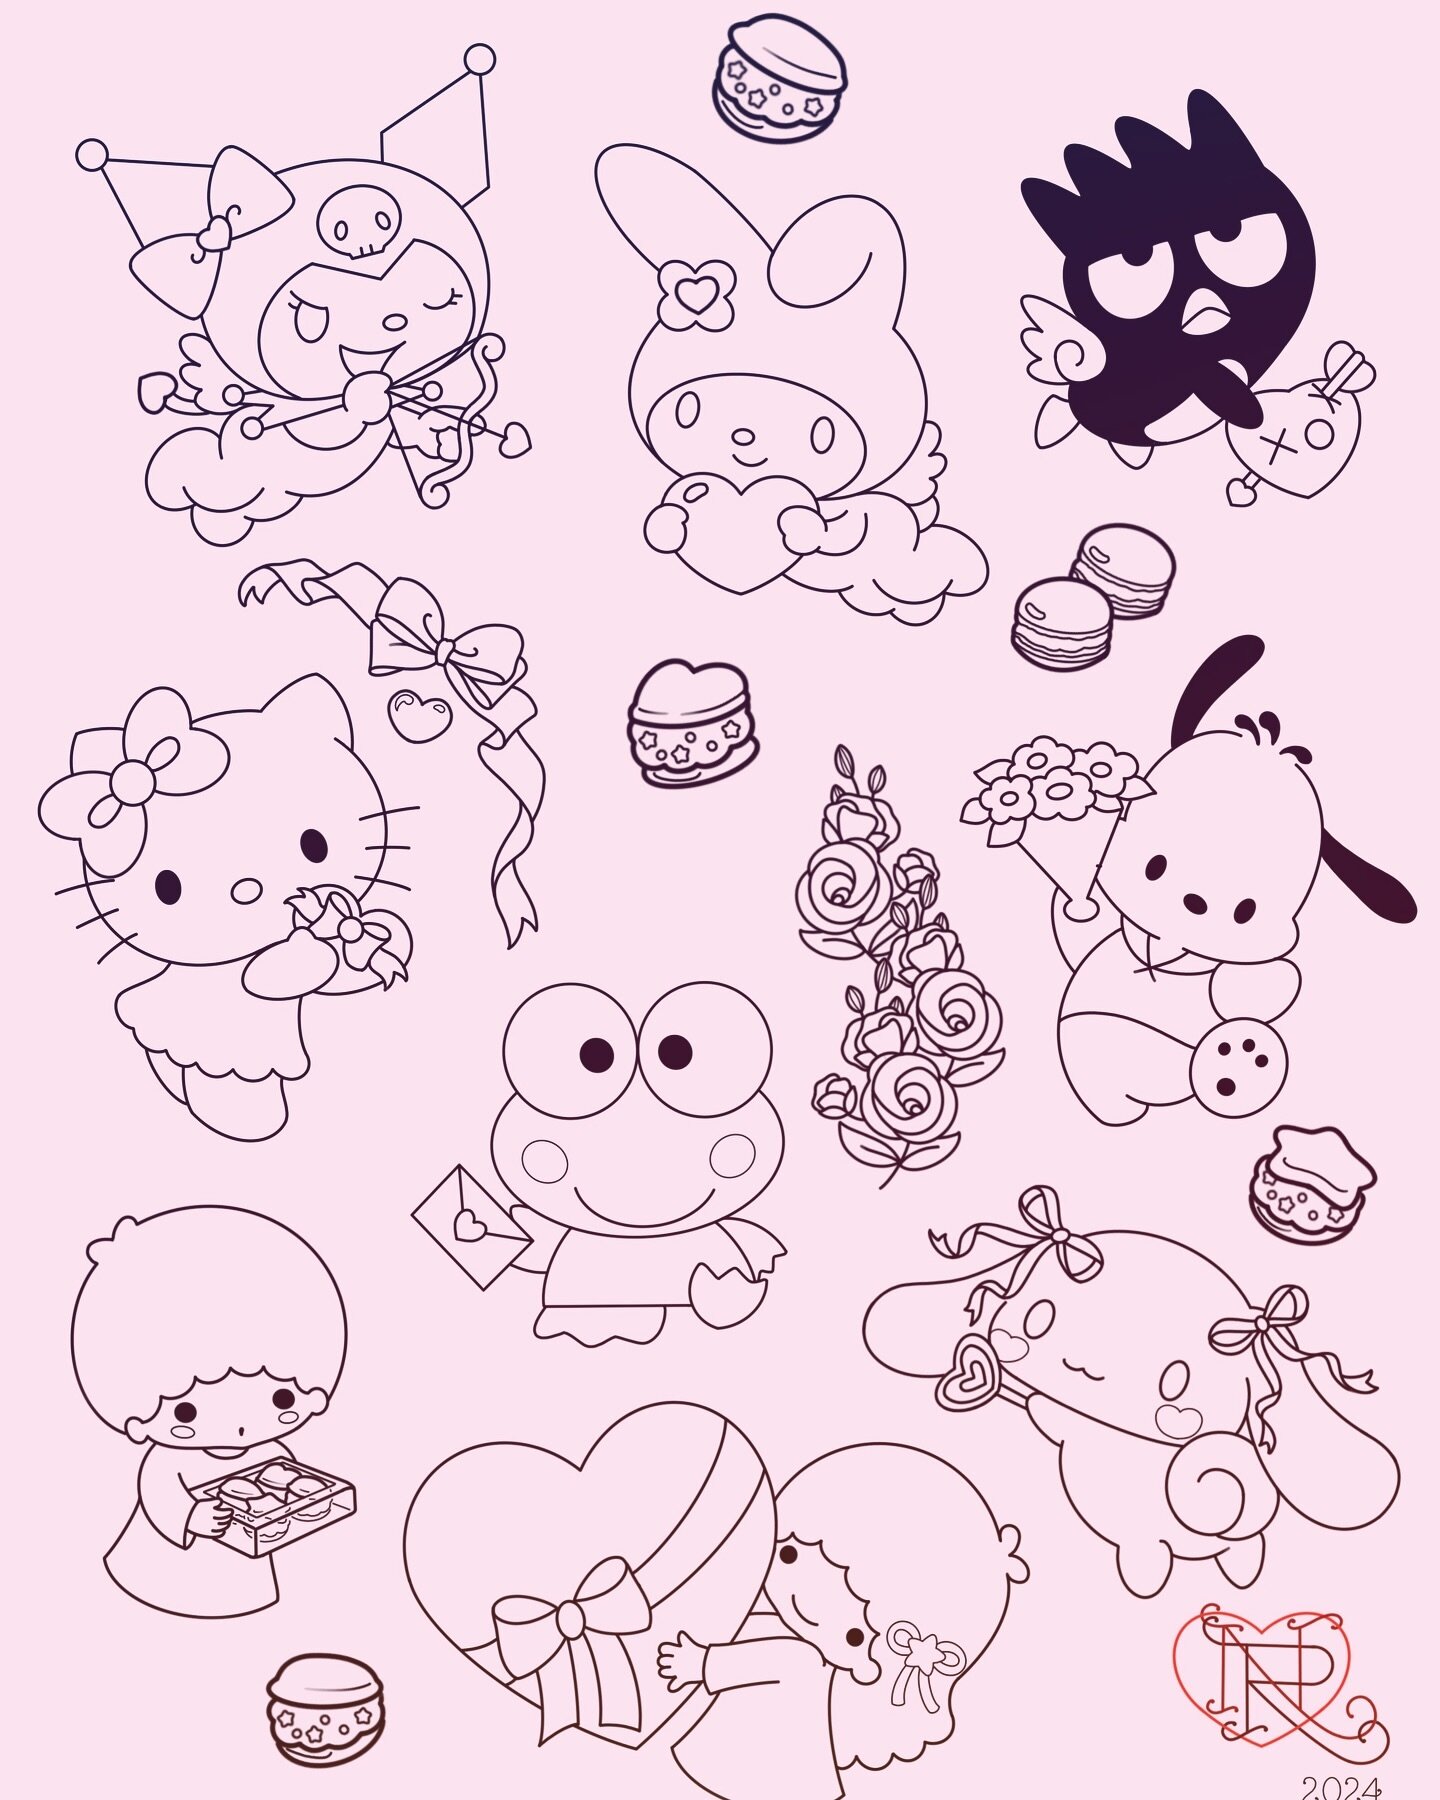 I&rsquo;ve been in love with Sanrio since I was 6 and will be even when I&rsquo;m old.

If you&rsquo;re like me and want a love that will quite literally last a lifetime then come to @robotpiercingtattoo on Valentines and get a sweet deal on these li